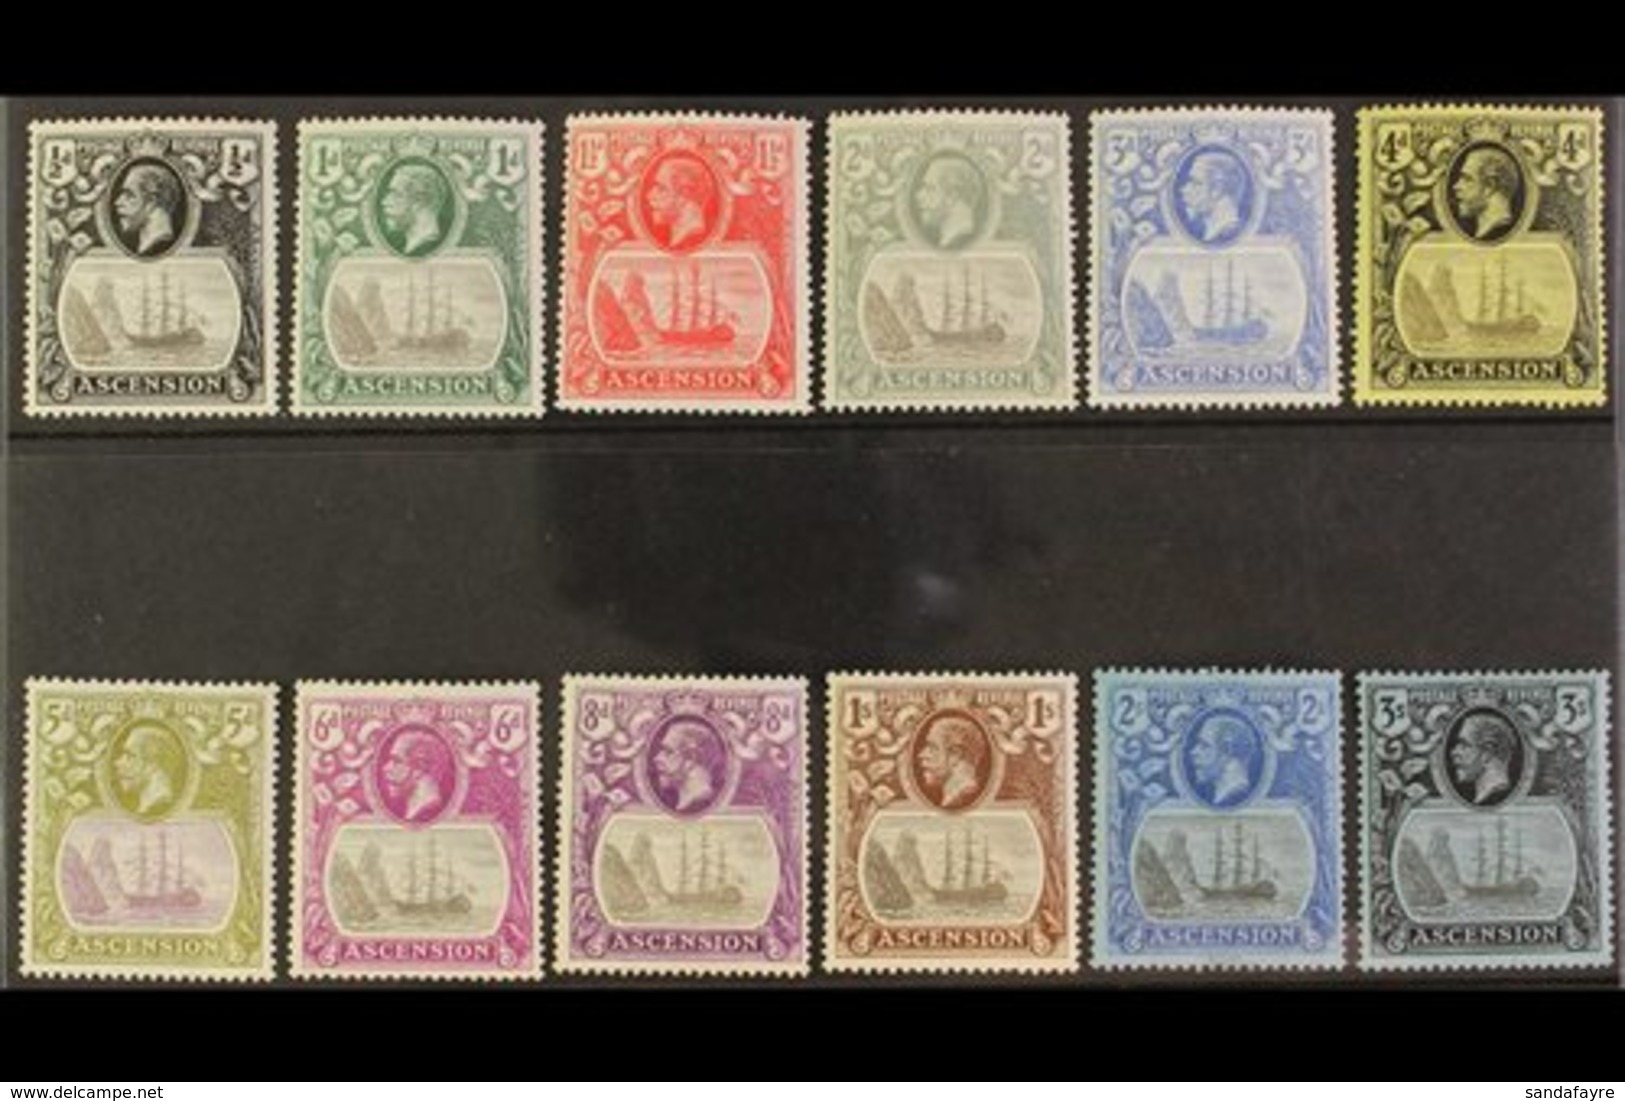 1924-33  KGV "Badge" Definitives Complete Set, SG 10/20, Very Fine Lightly Hinged Mint. Fresh And Attractive. (12 Stamps - Ascensión